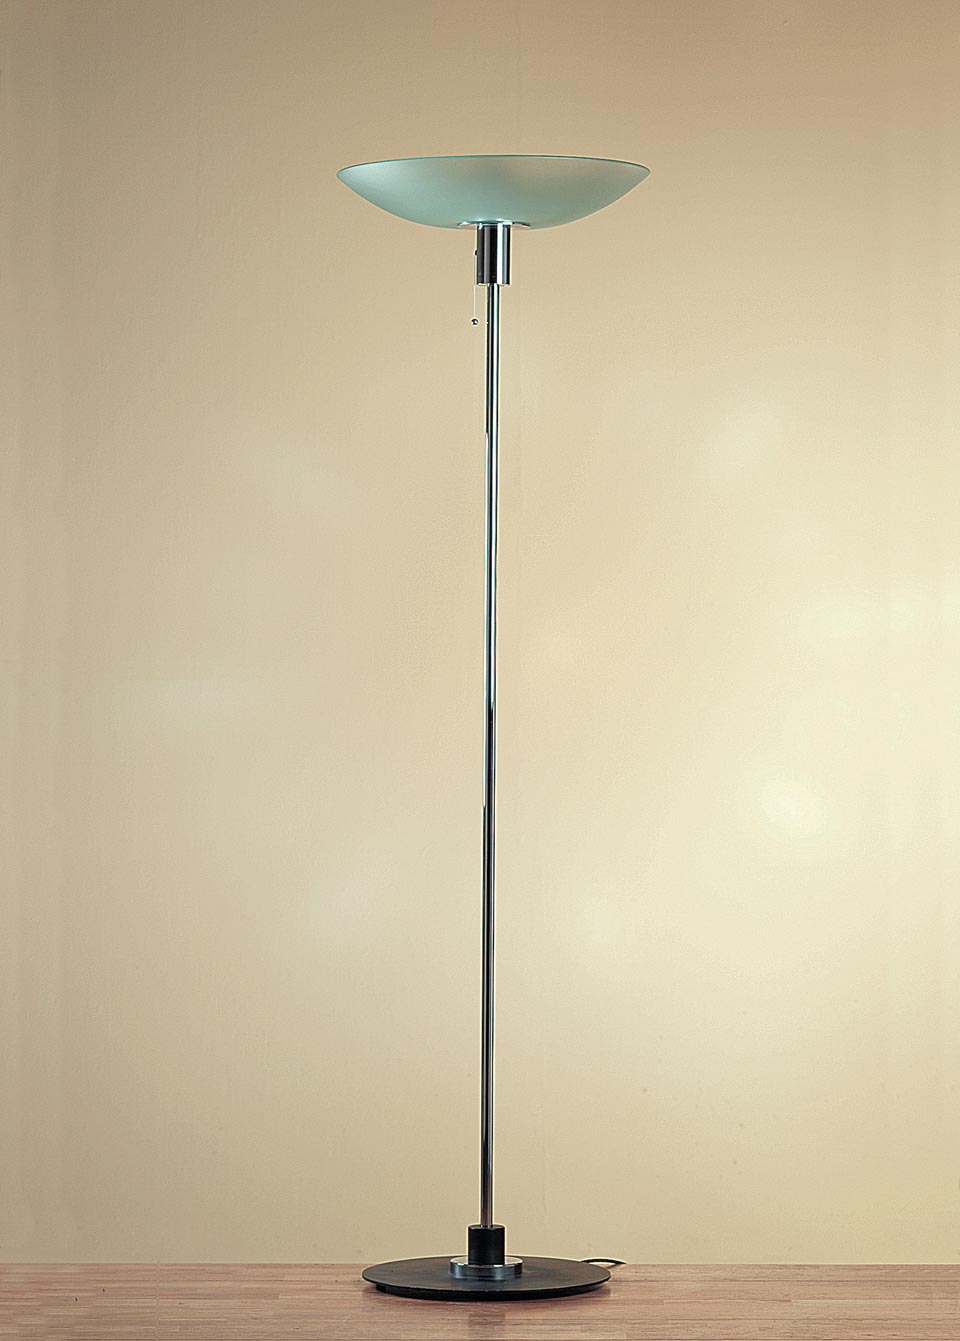 Large Retro Floor Lamp Contract More, Large Tall Floor Lamps